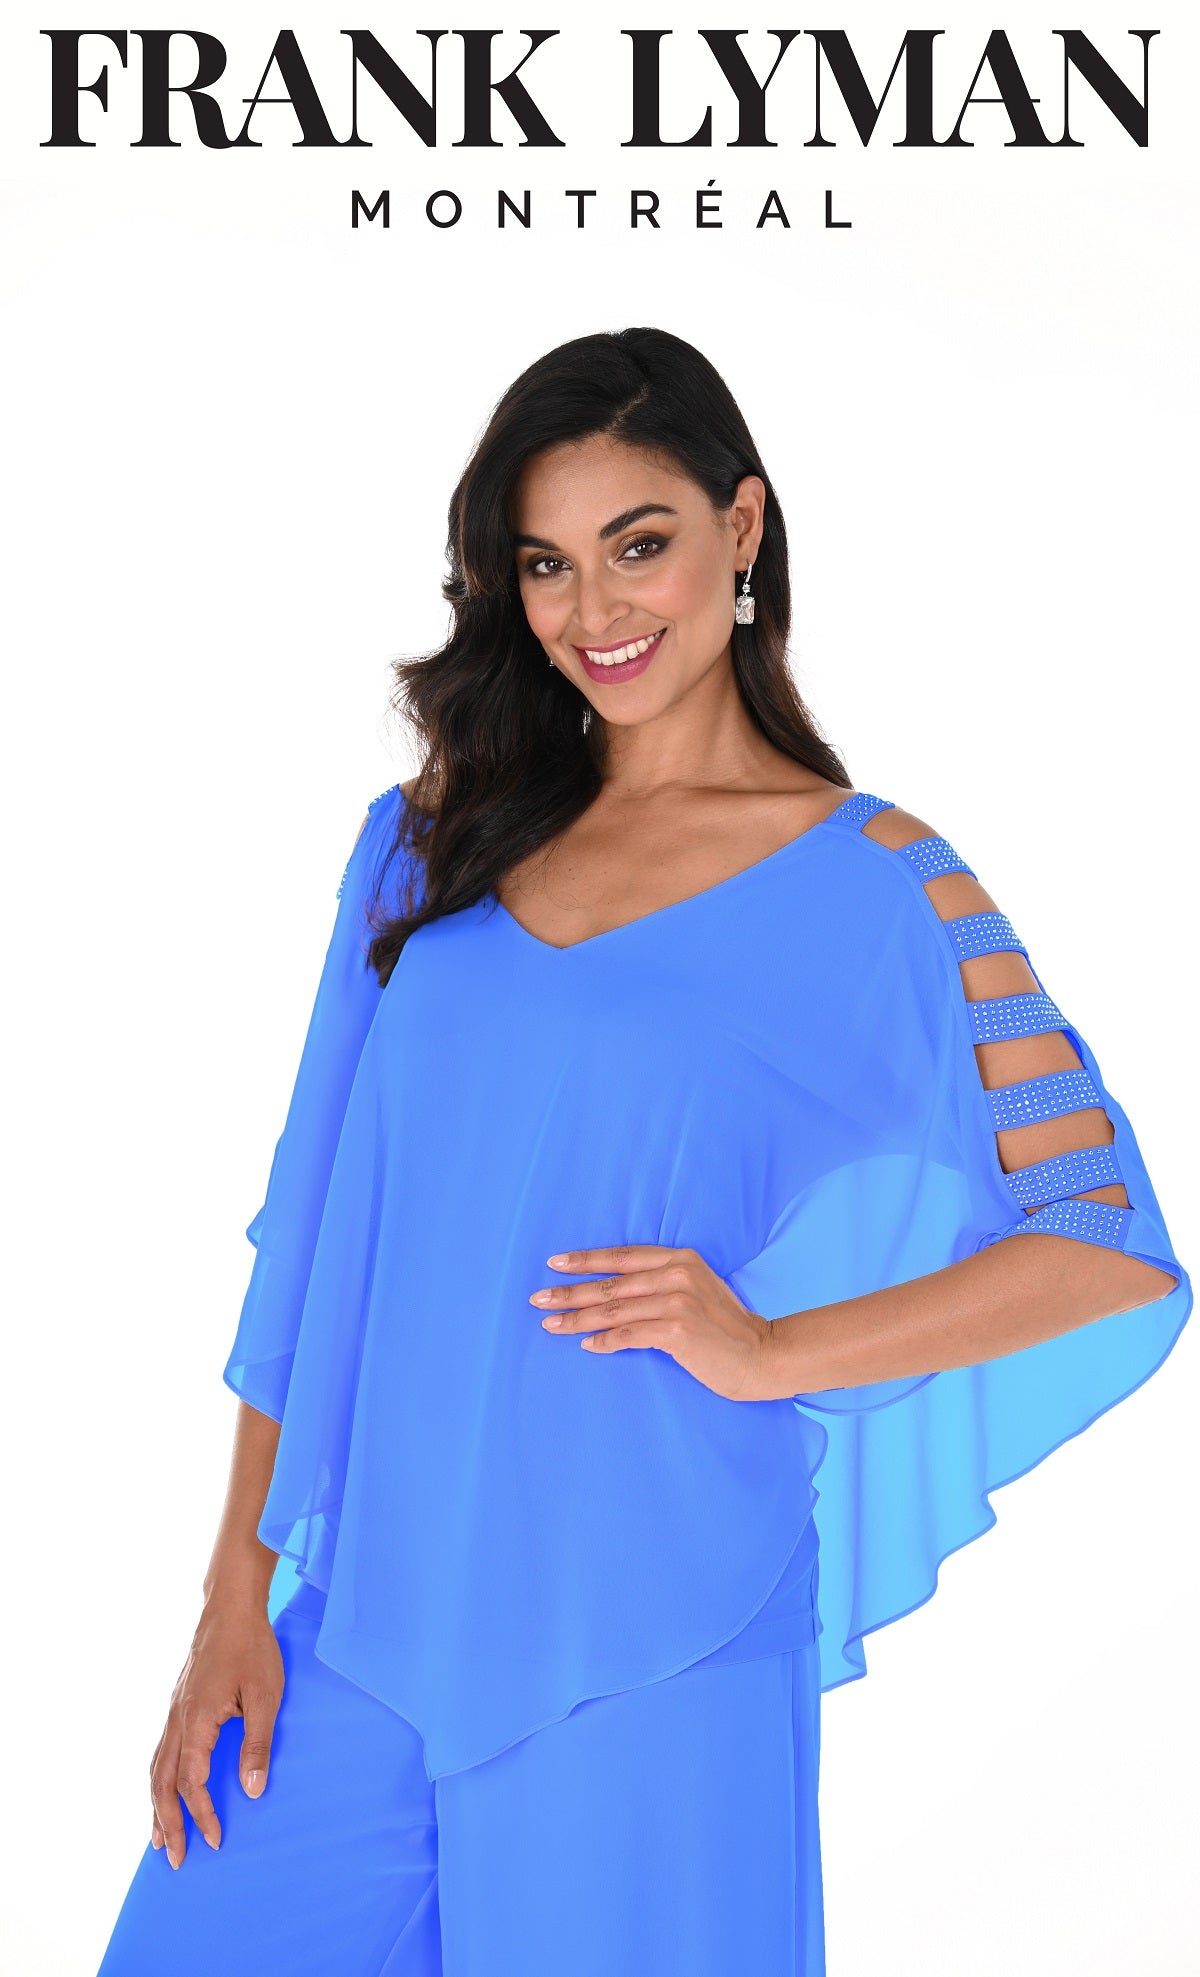 Frank Lyman Montreal Aqua Blue Evening Top With Cut Out Embellished Arm Detail